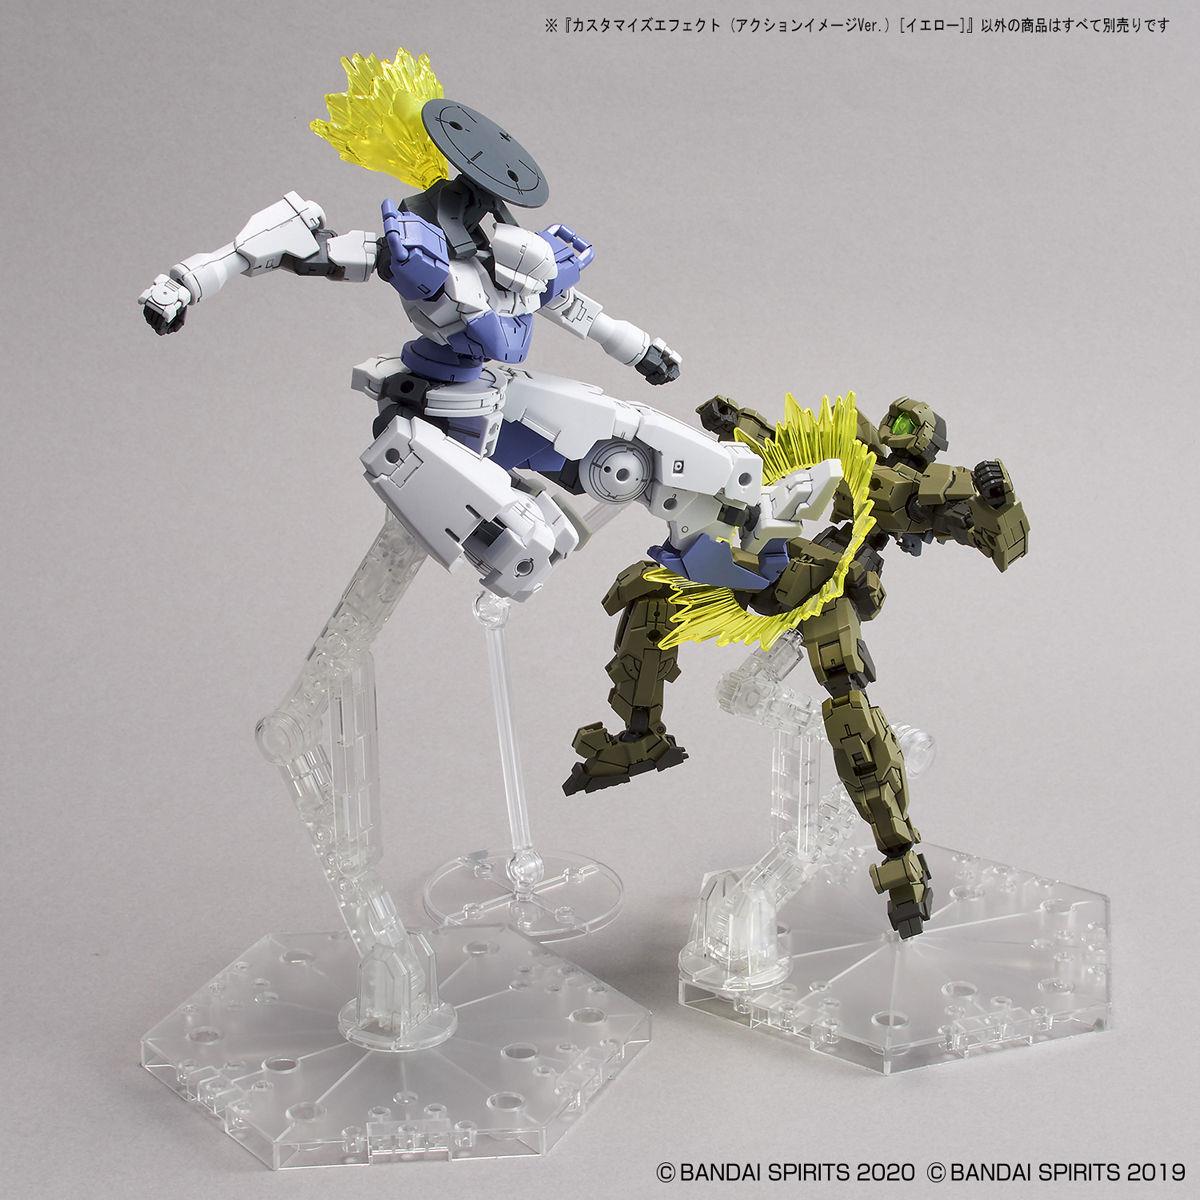 30 Minutes Missions: Customize Effect [Action Image Ver.] [Yellow] 1/144 Model Option Pack